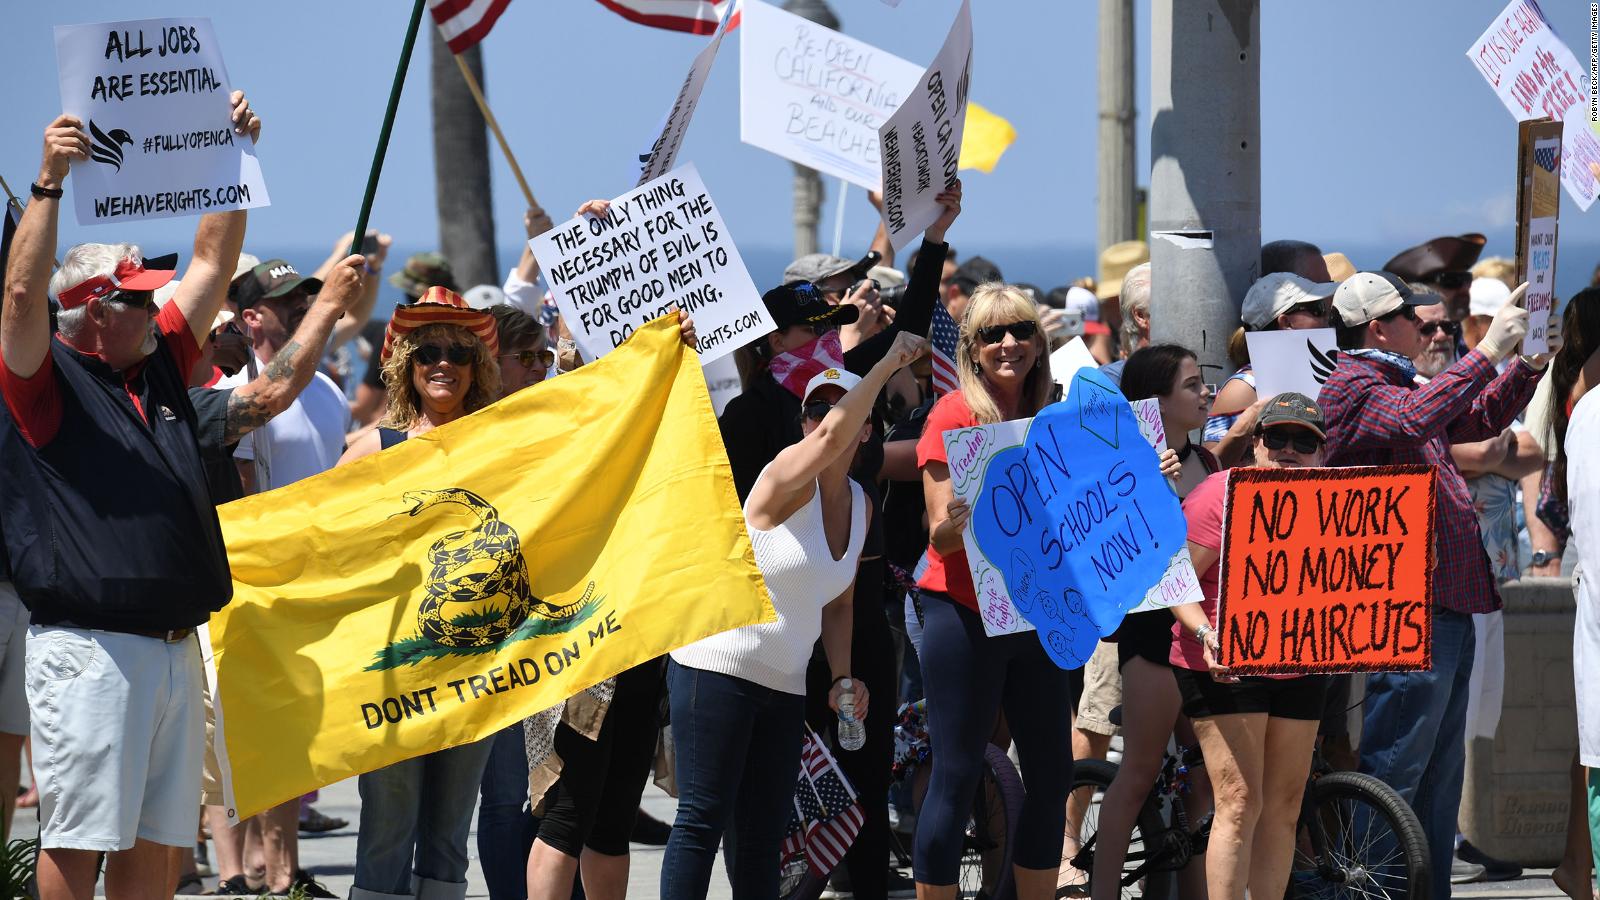 Large crowds in Huntington Beach protest beach closures by California